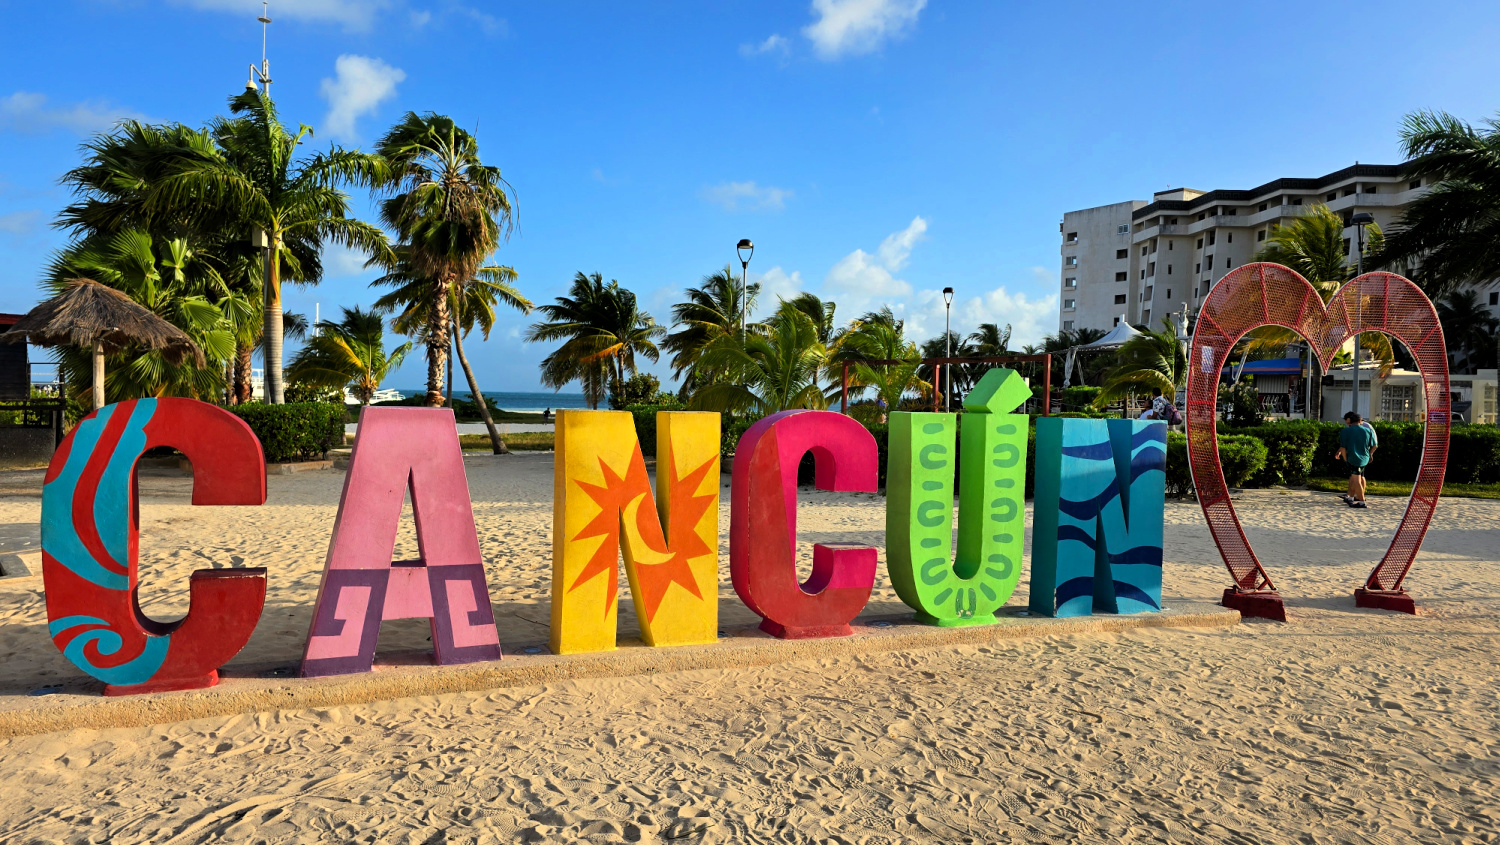 The Cancun sign